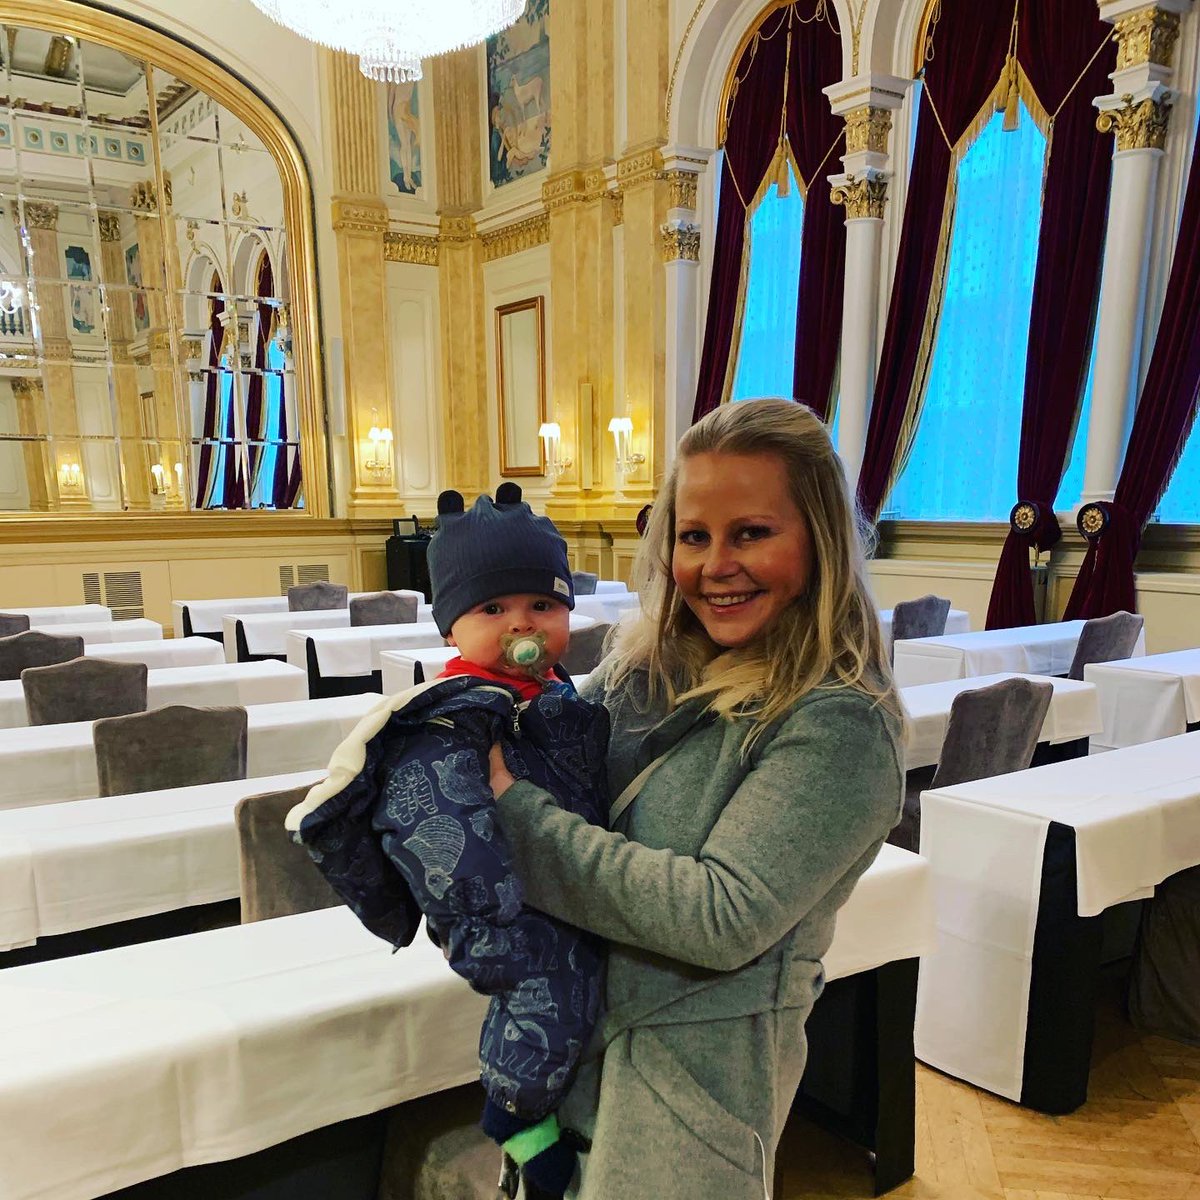 These are good premises - let’s make the reservation, said the baby! 🤩 #IFCLA International conference in the making. Save the date! June 16-17th, 2022. #ITLaw